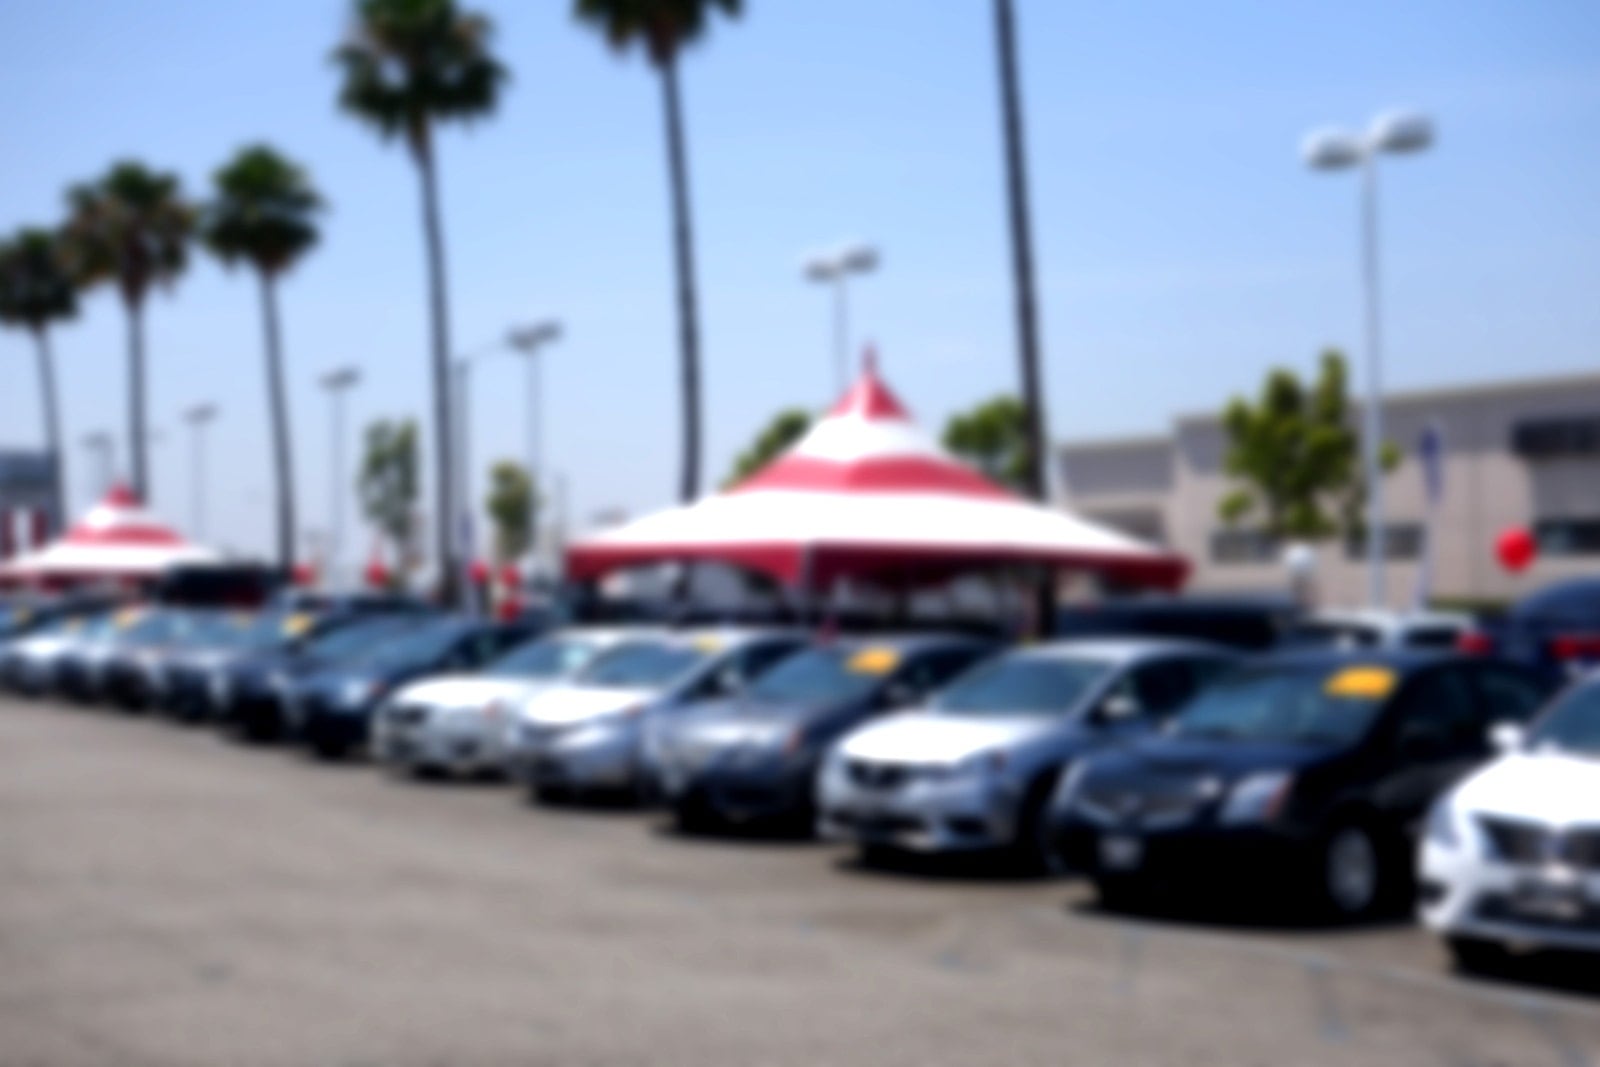 Out of focus image of the lineup of cars at a dealership